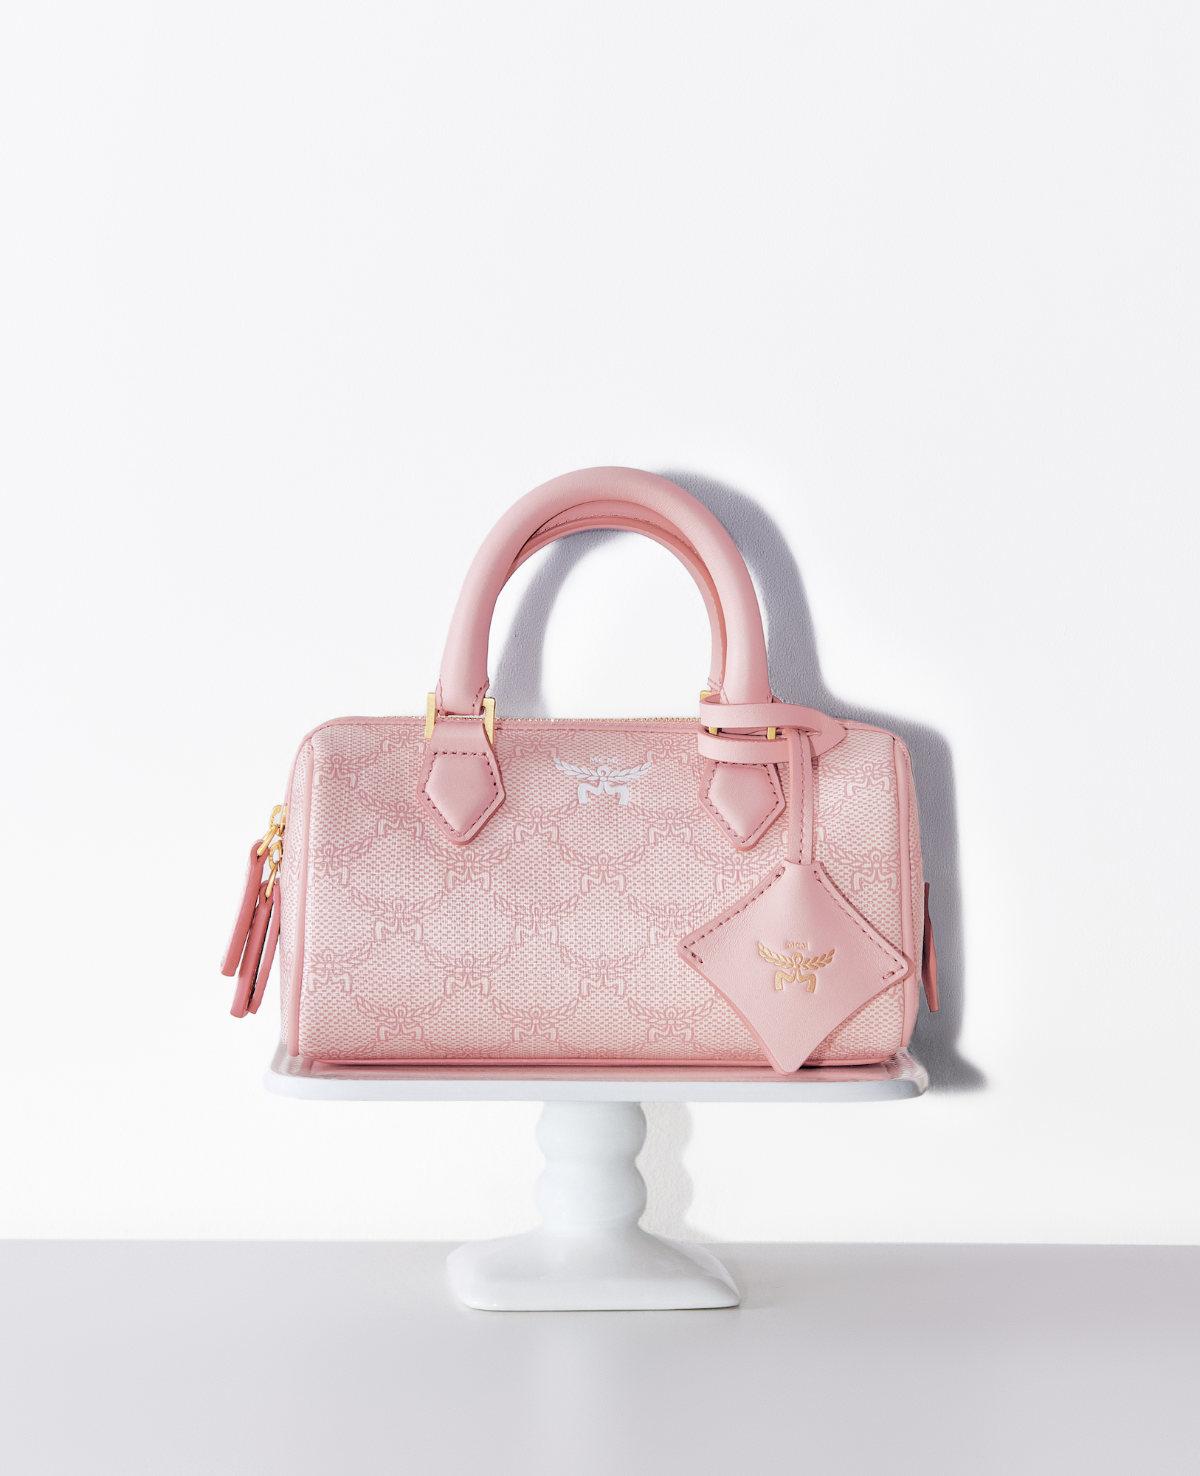 MCM Presents Its New Lauretos Monogram In The Pink Color